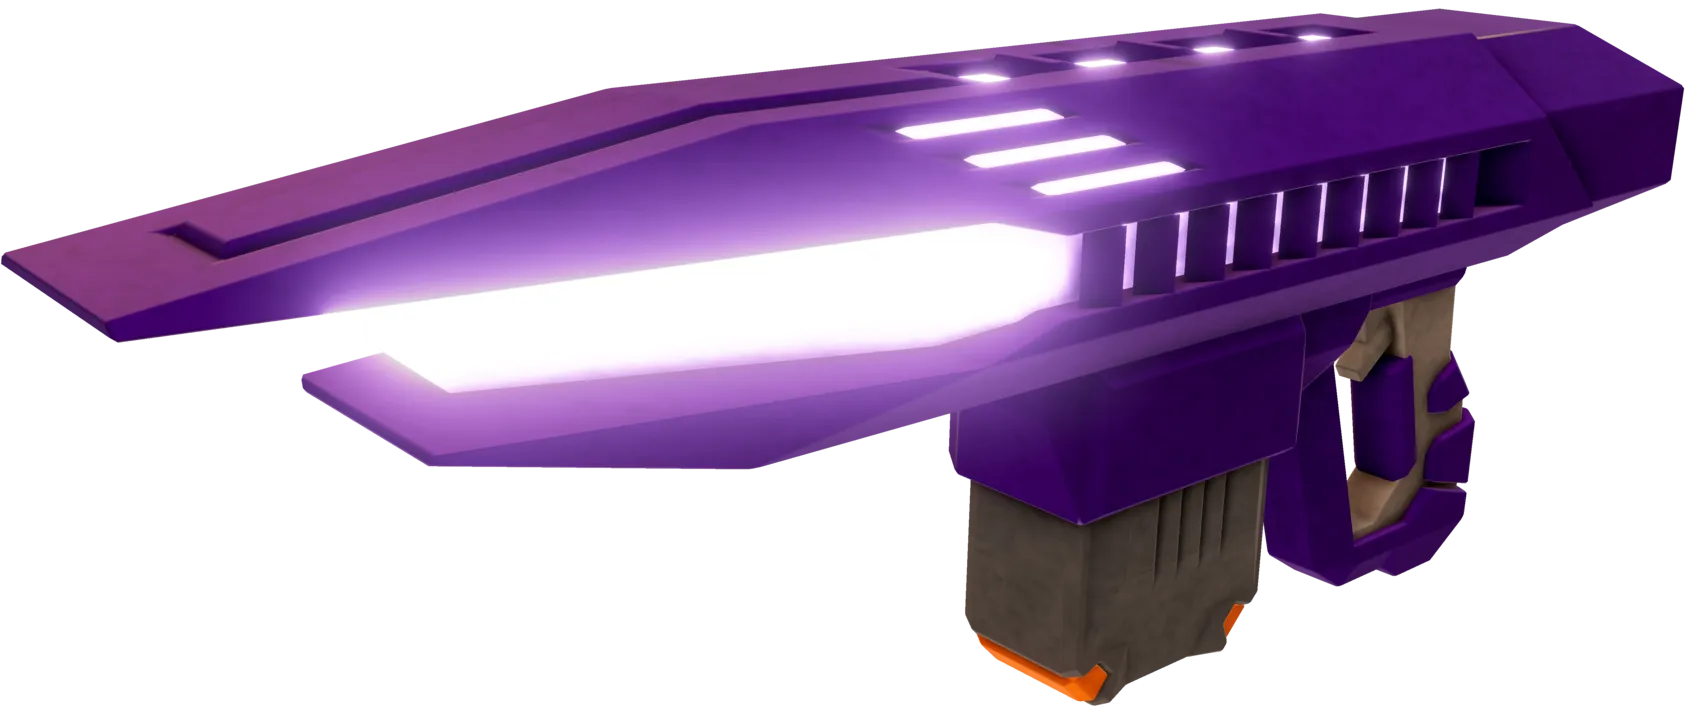 A compact purple plasma cannon with a glowing core